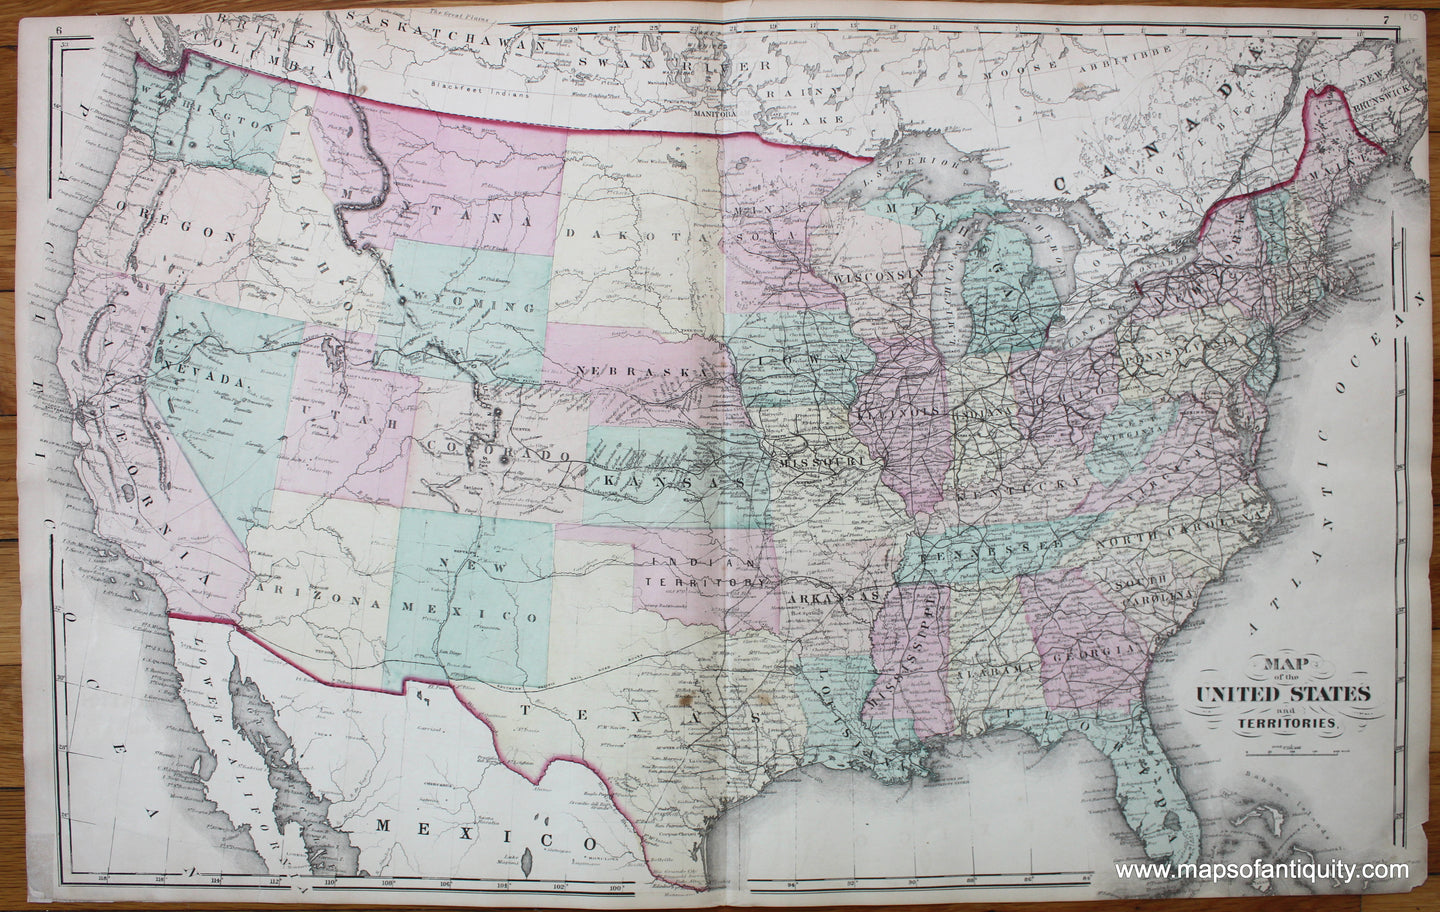 Antique-Hand-Colored-Map-Map-of-United-States-and-Territories-1876-Comstock-&-Cline-United-States-General-1800s-19th-century-Maps-of-Antiquity